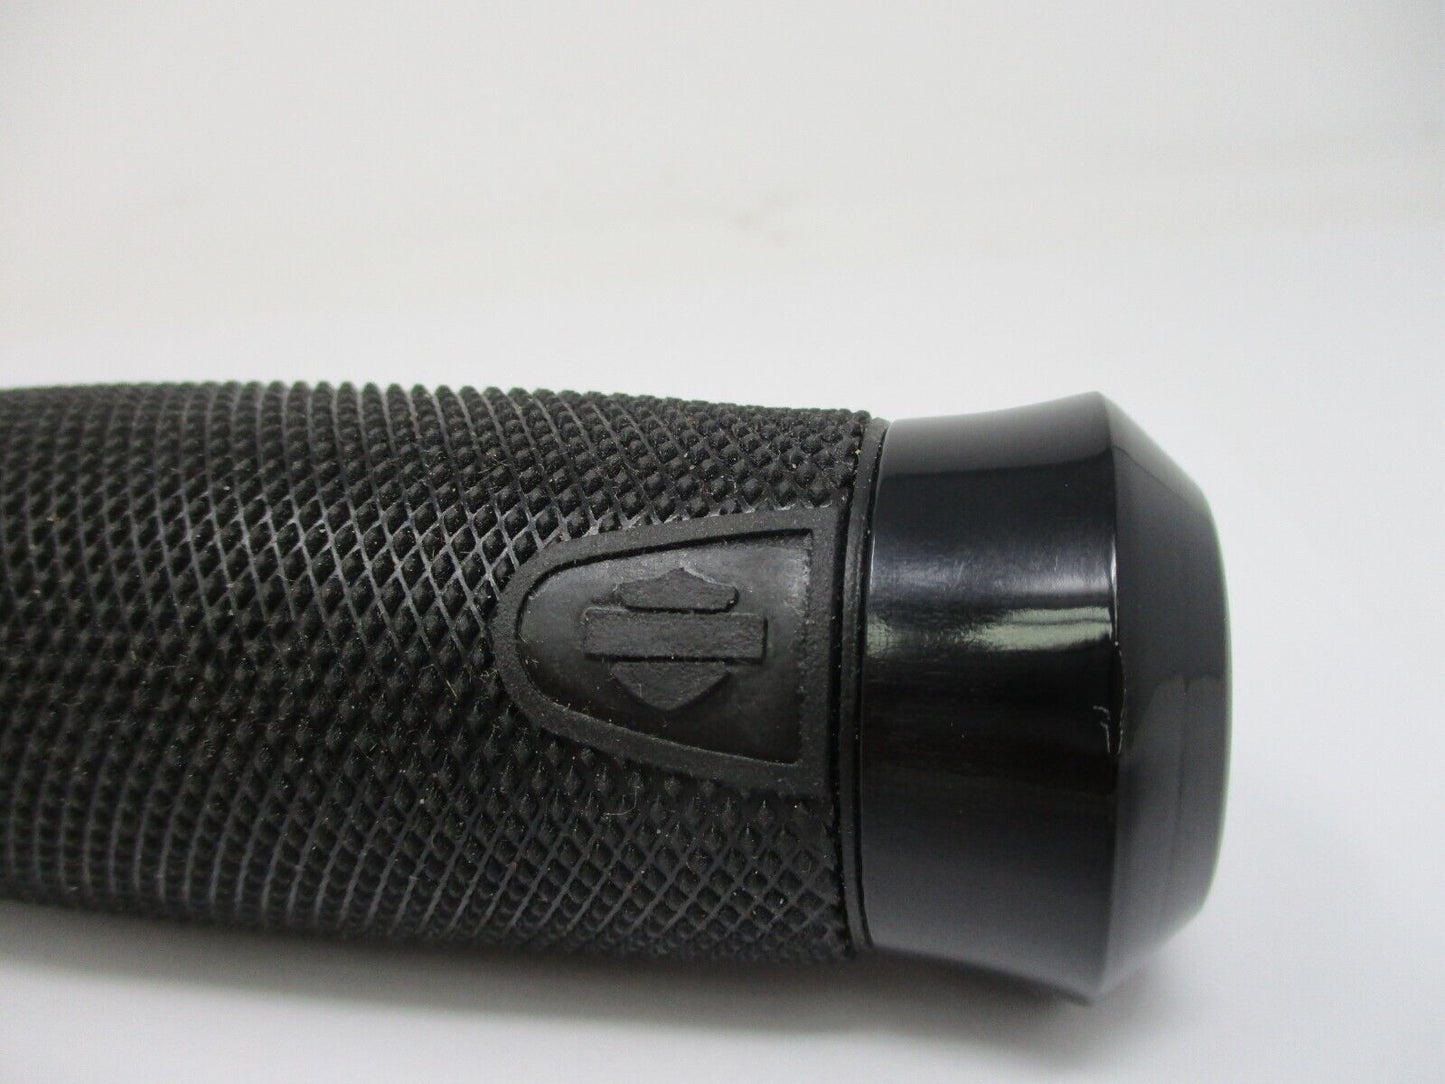 Harley Davidson Right Grip "Get-A-Grip"  from kit 56100010